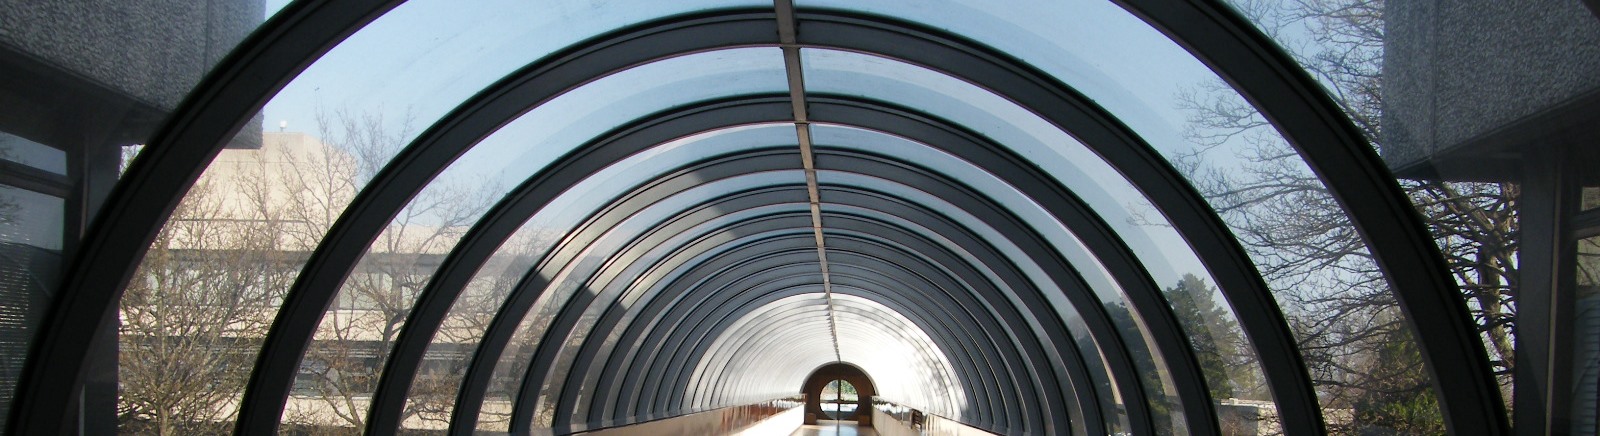 Image of sky tunnel between two building, circular shape